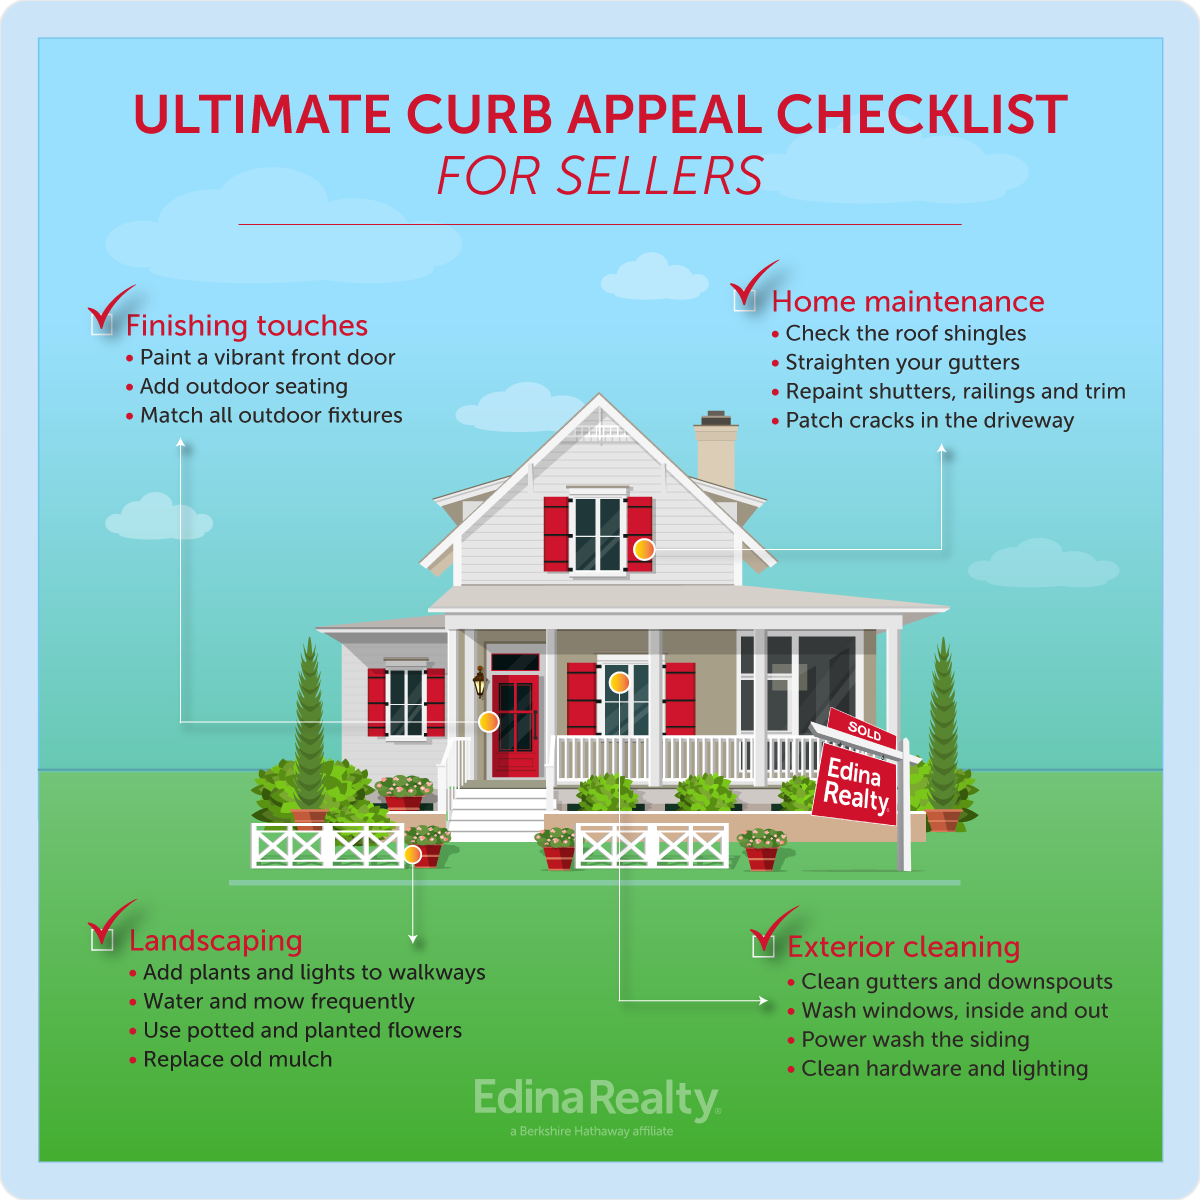 Ultimate curb appeal checklist for sellers